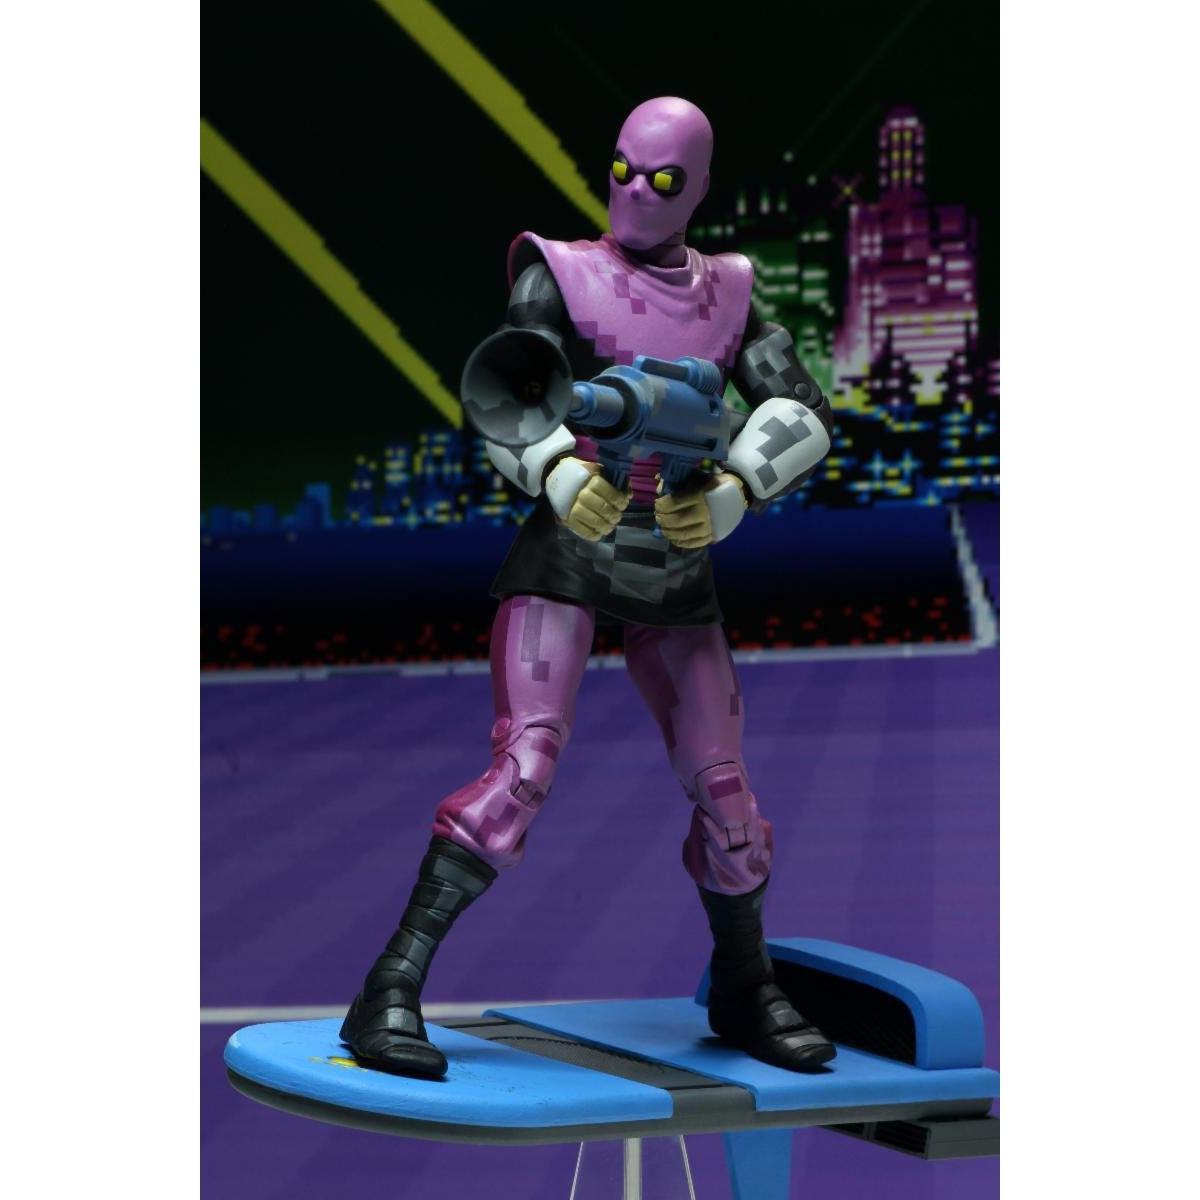 Image of TMNT: Turtles in Time - 7" Scale Action Figures - Foot Soldier